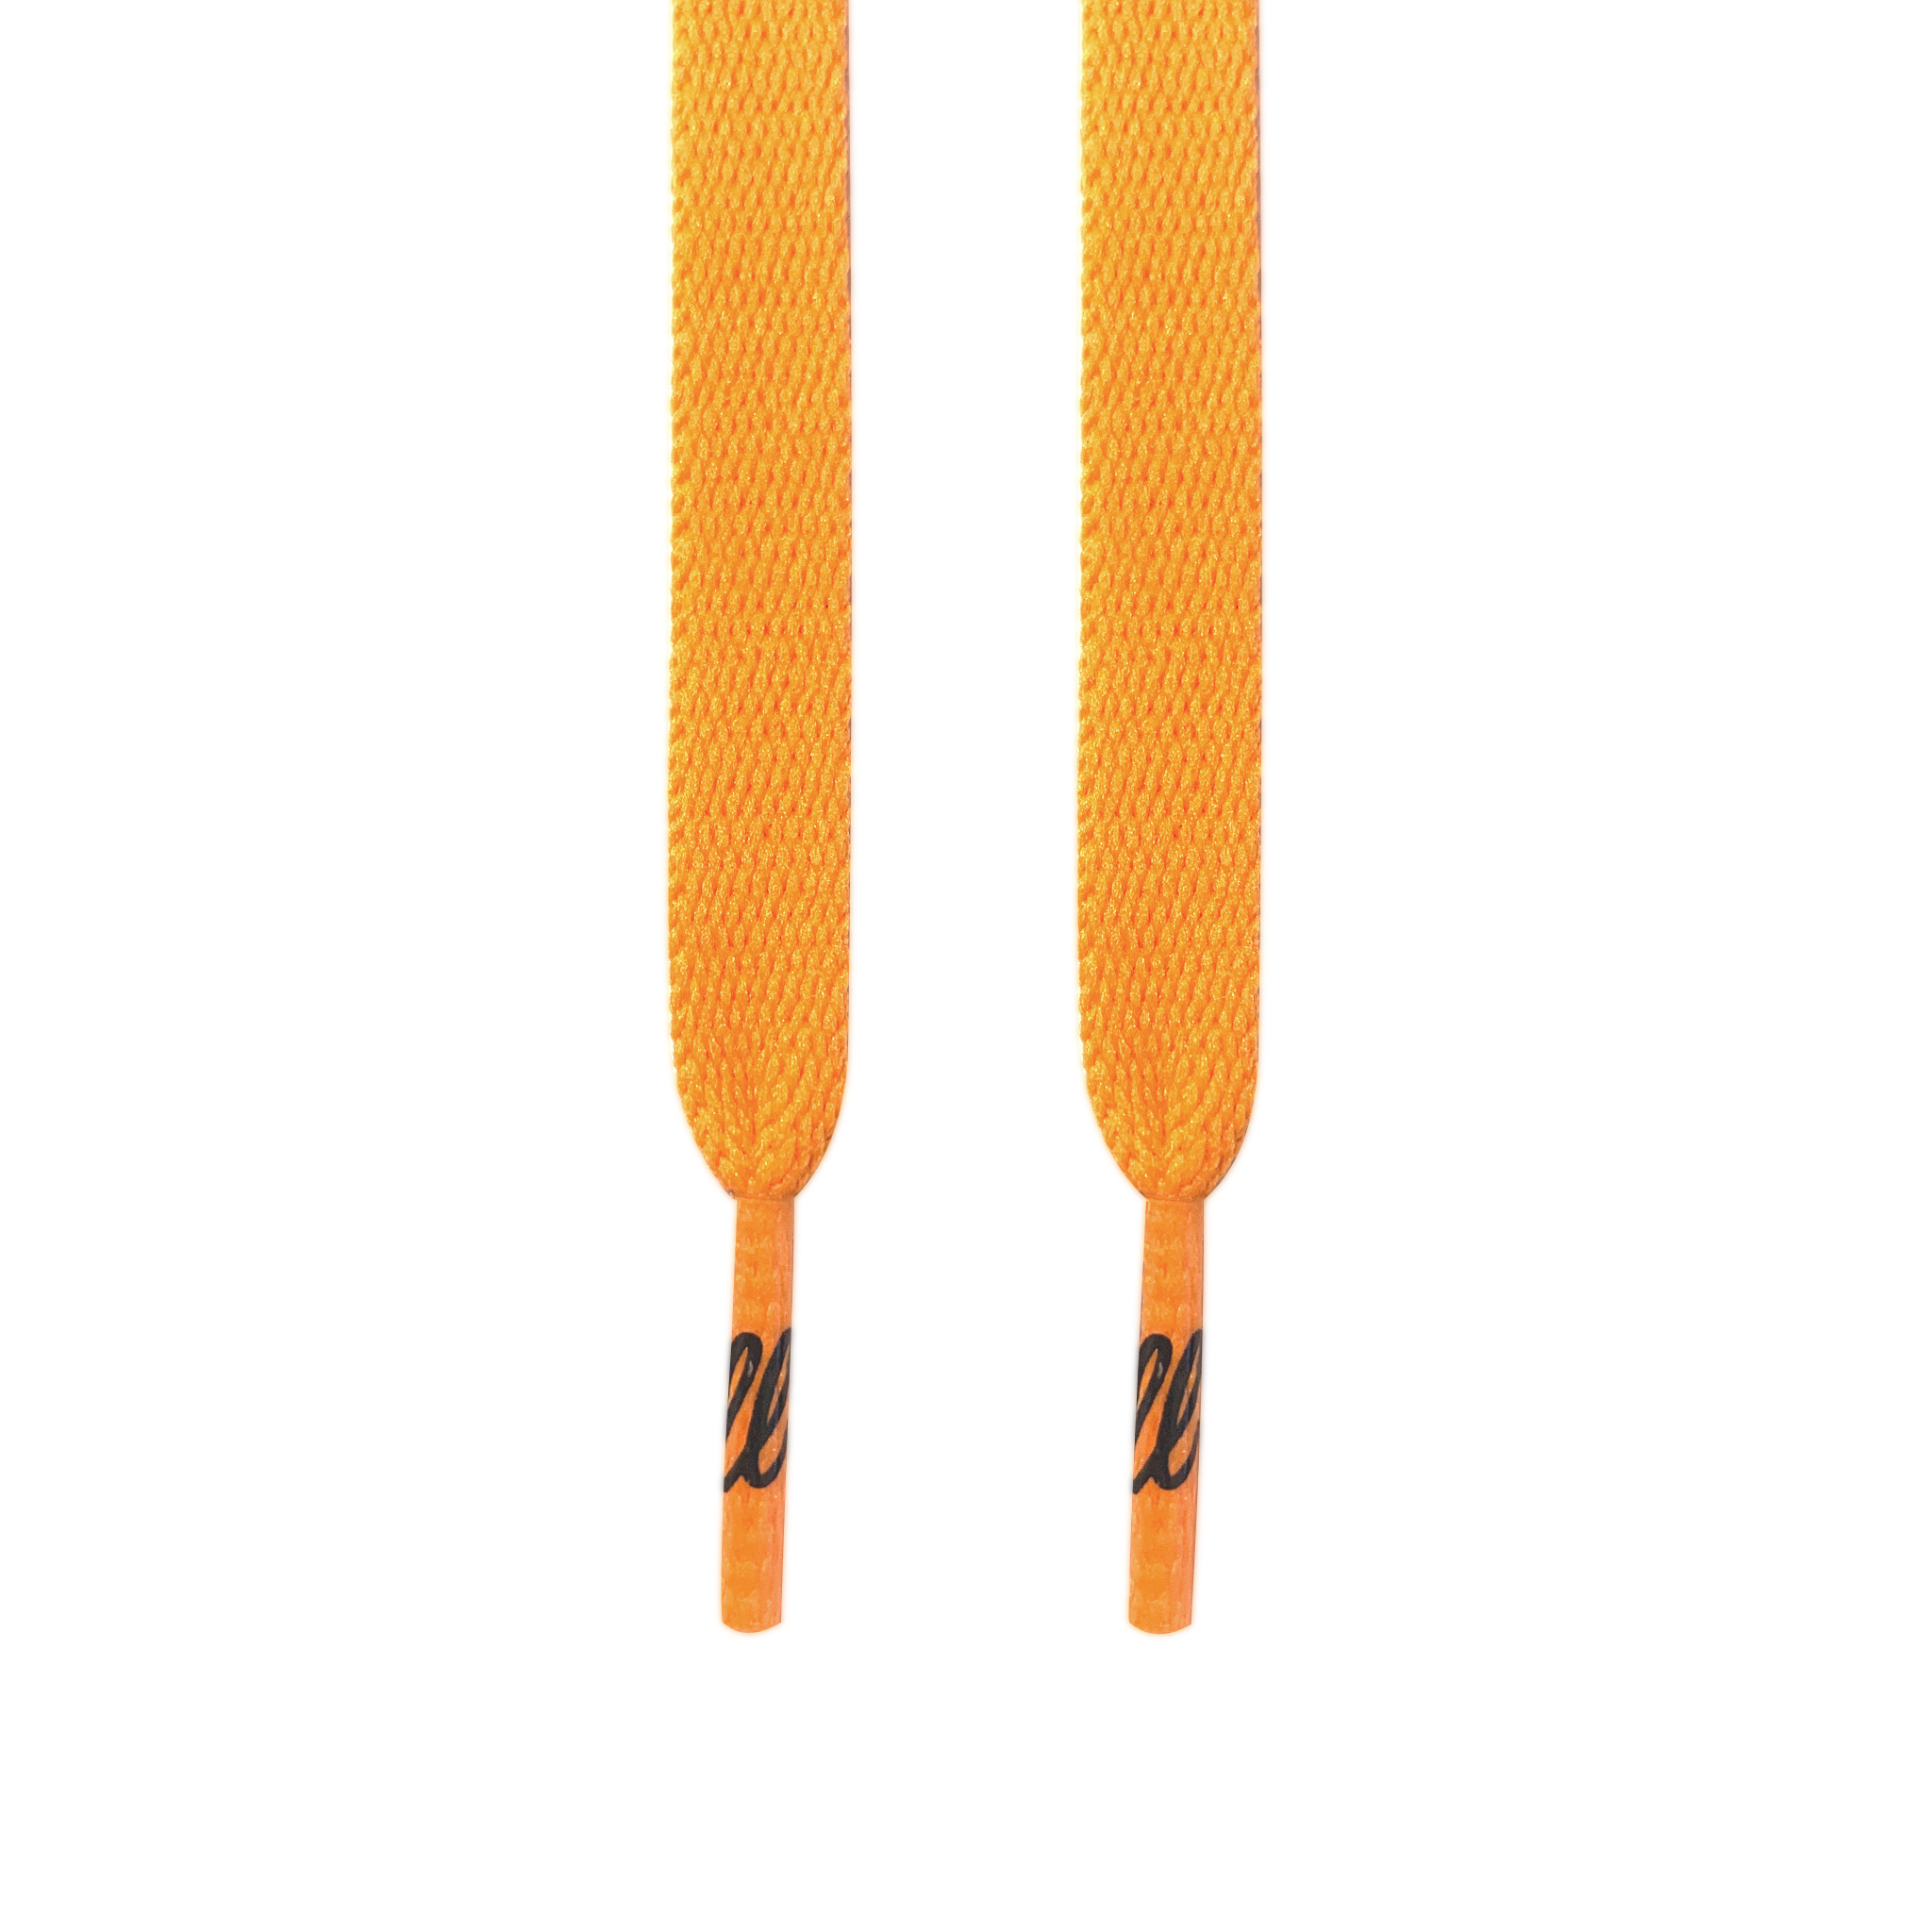 Union Gold Flat Shoelaces – Looped Laces